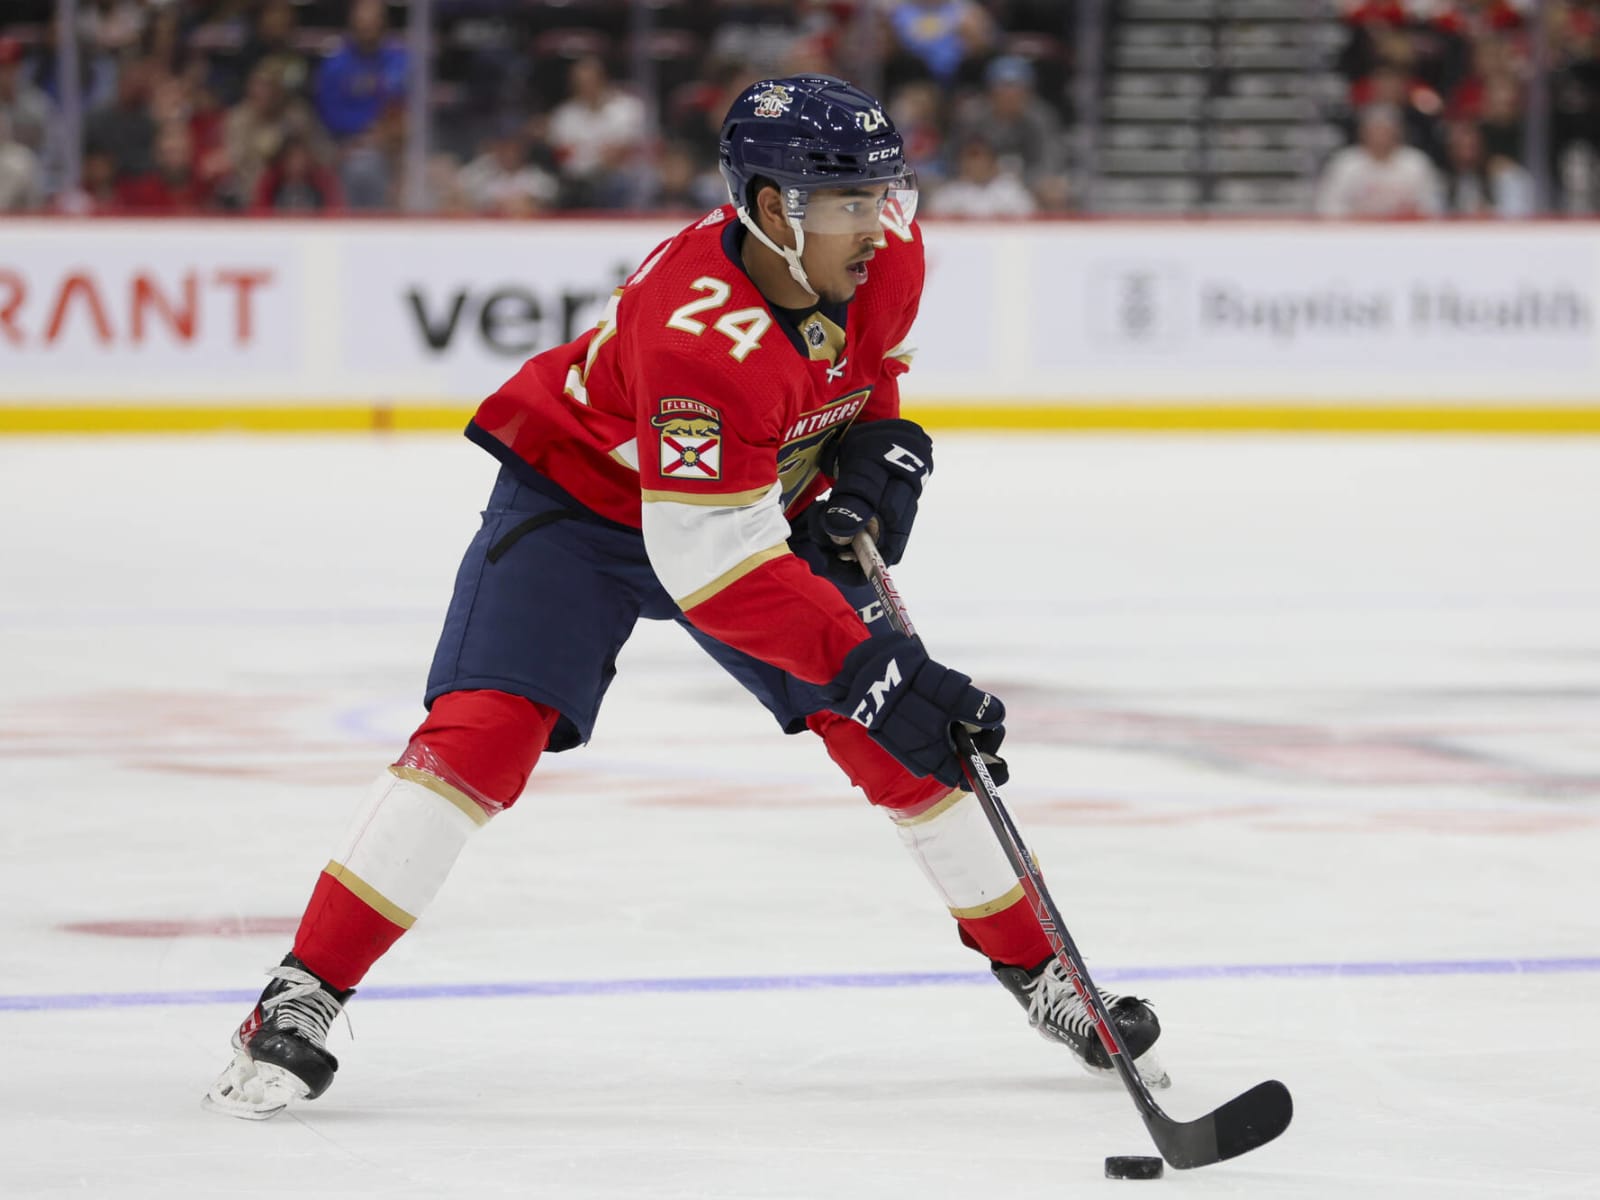 Florida Panthers Plan for Samoskevich & Sourdif? 'They Will Play